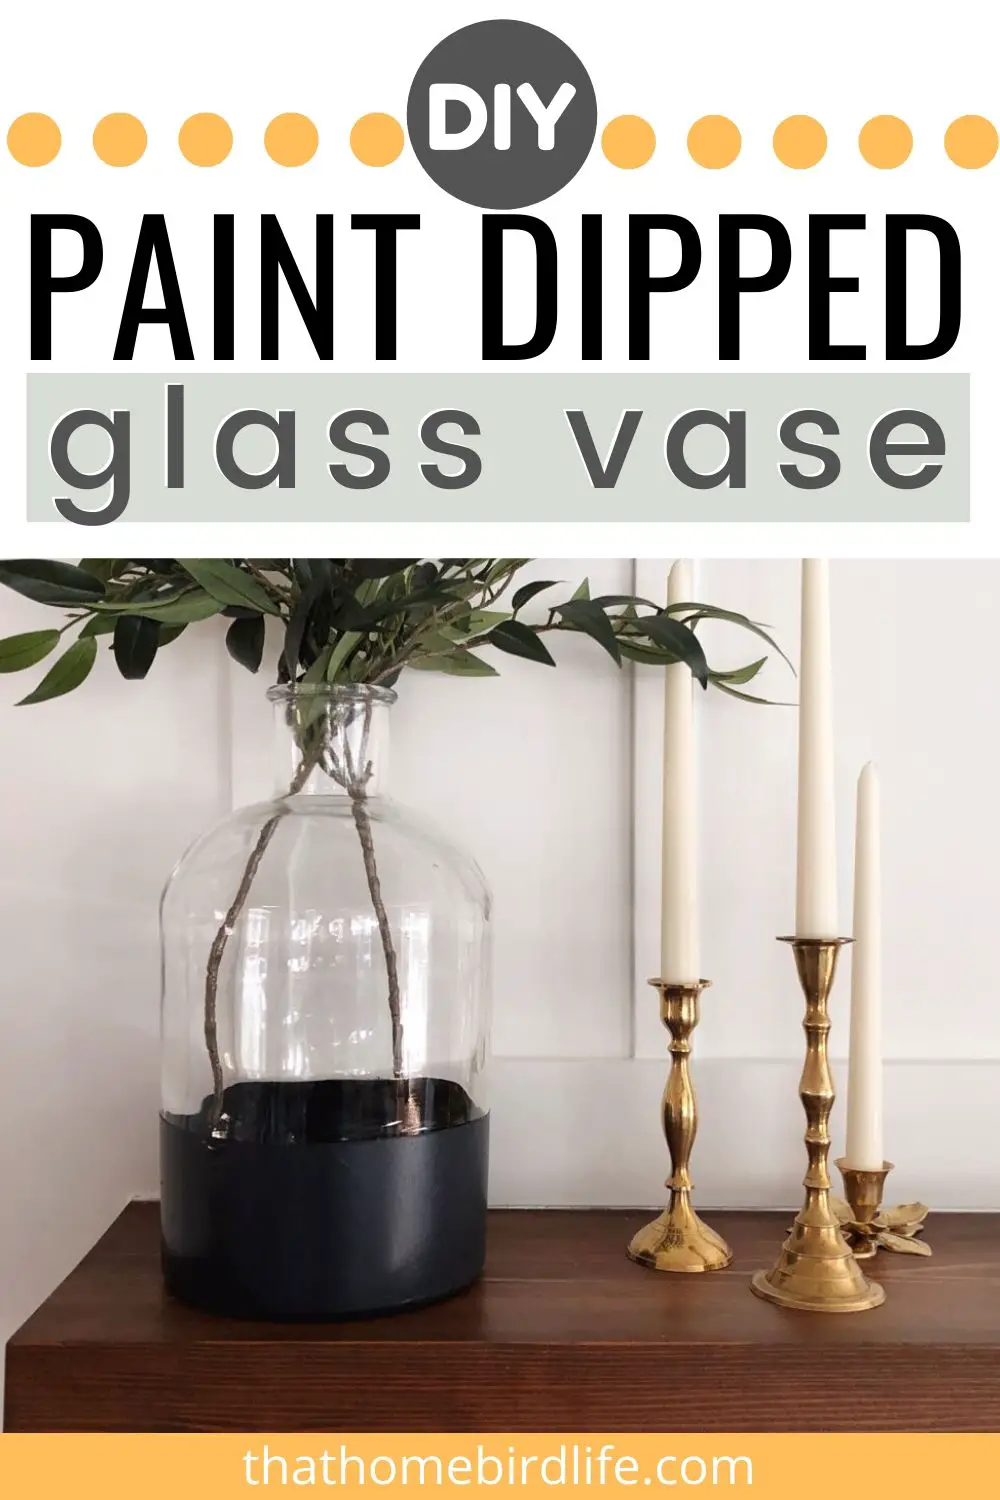 How to Make a DIY Paint Dipped Glass Vase